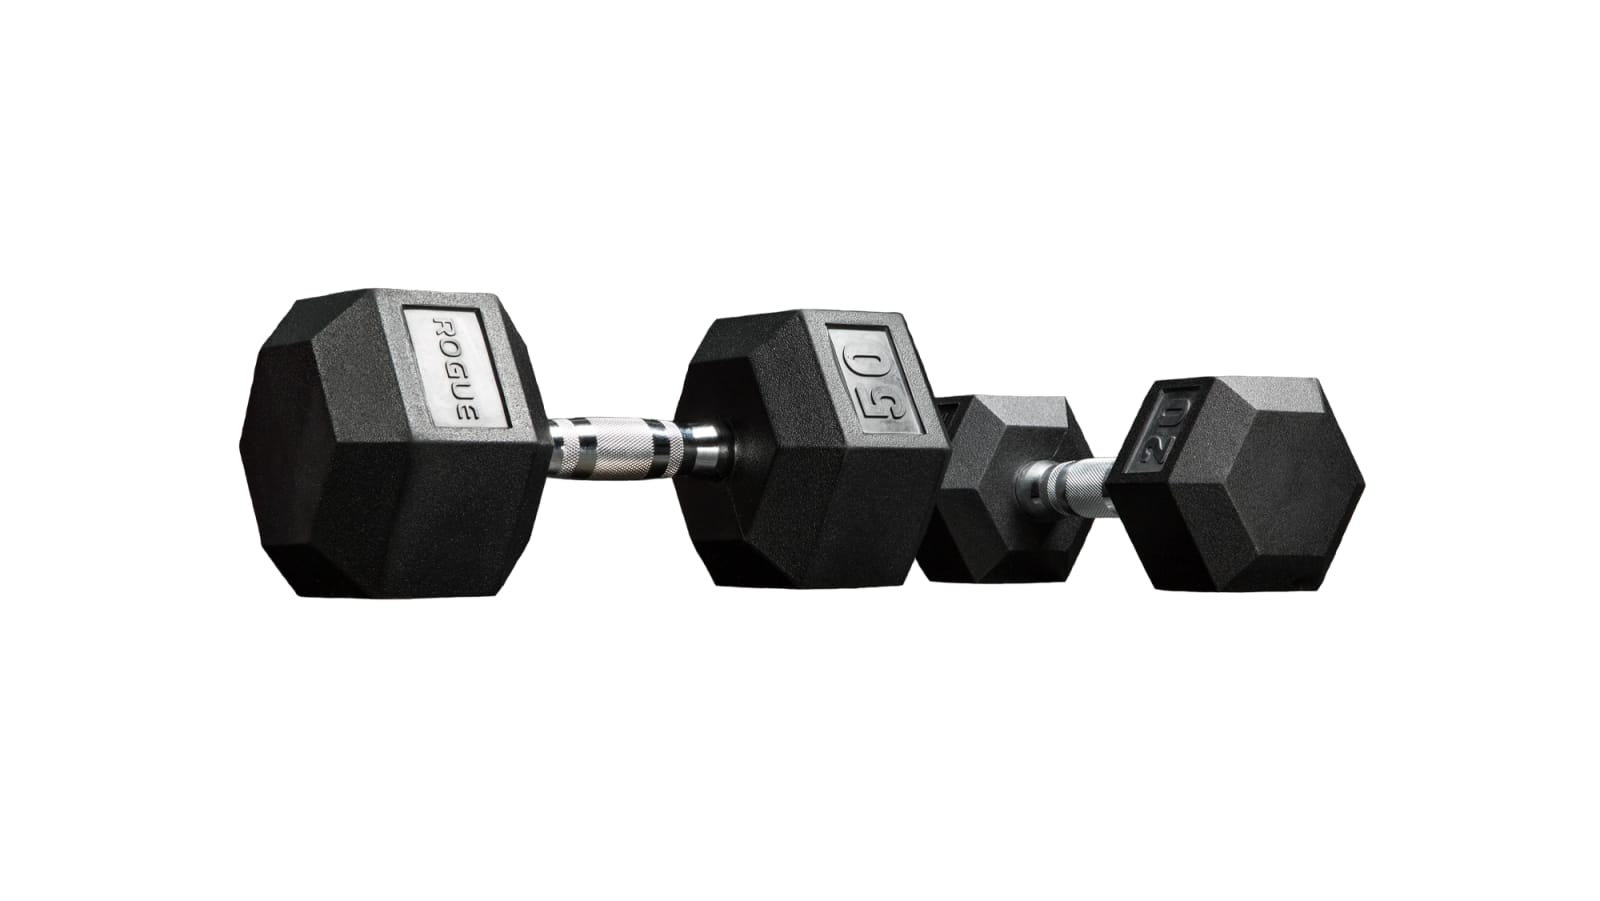 NEW ETHOS RUBBER HEX DUMBBELLS WEIGHTS 5 10 15 20 25 30 35 45 50 Single/ Pair 